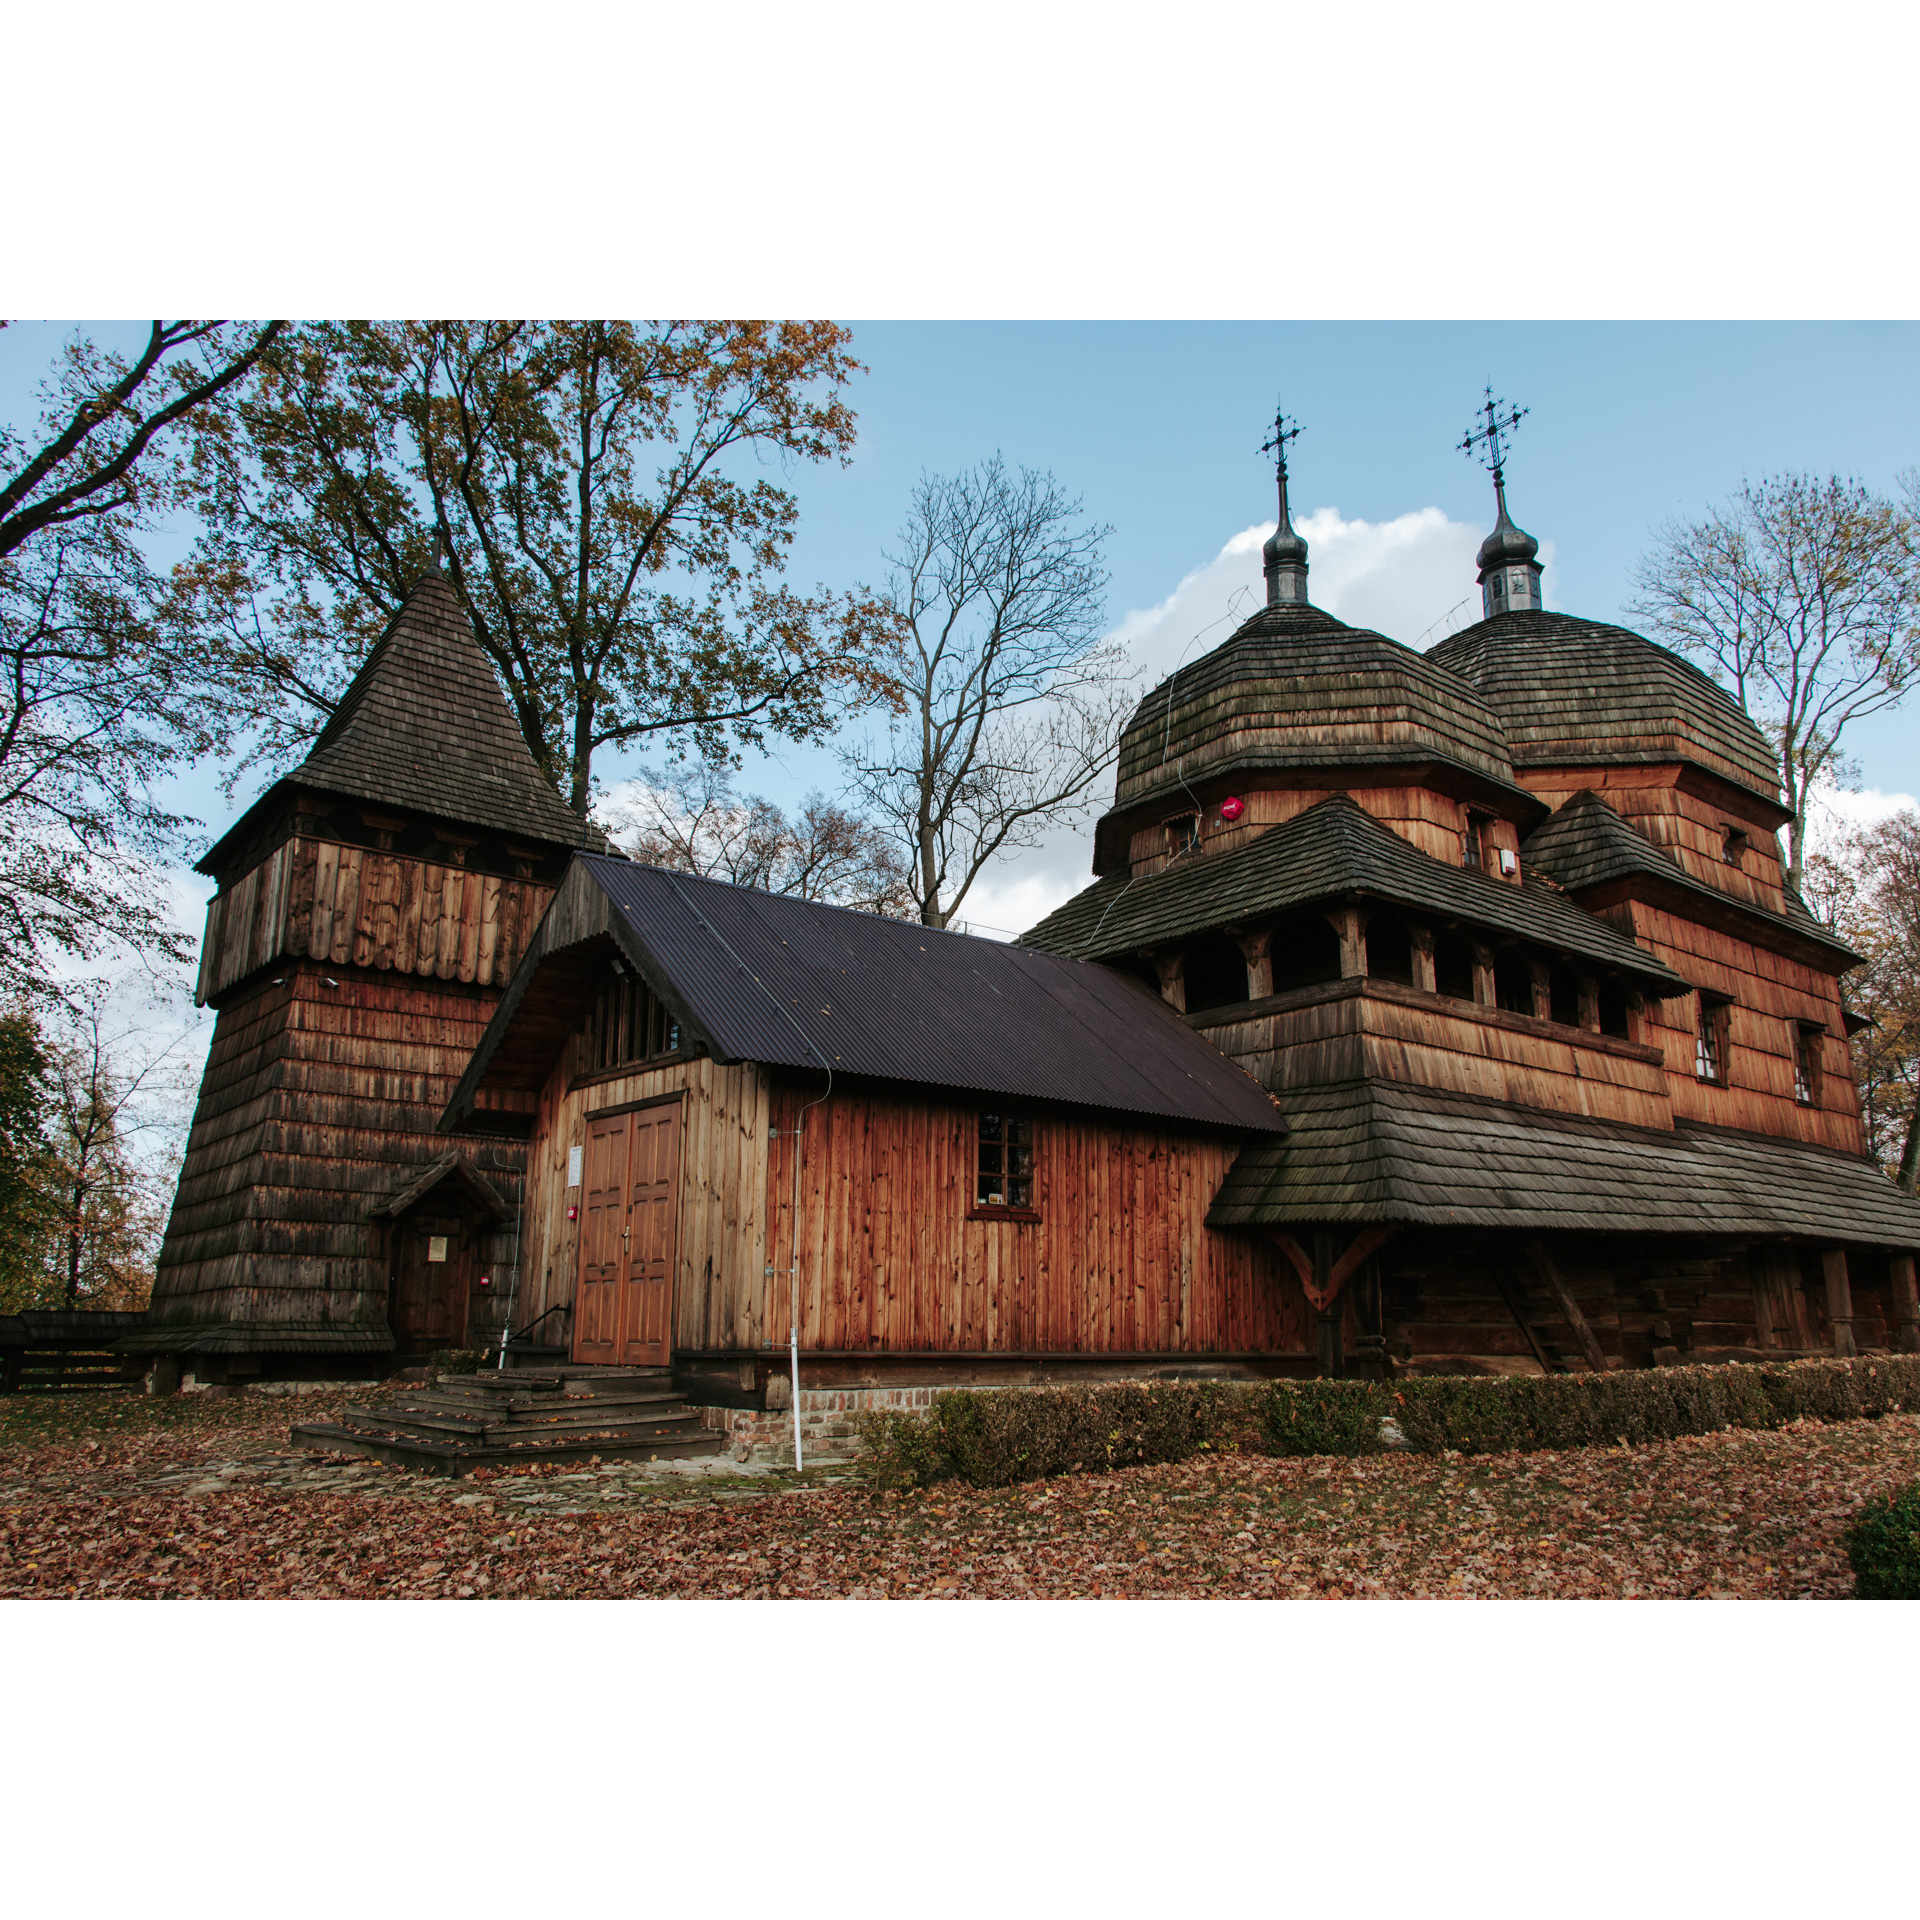 Wooden historic church with 2 towers with a domed roof and one tower with a pointed roof